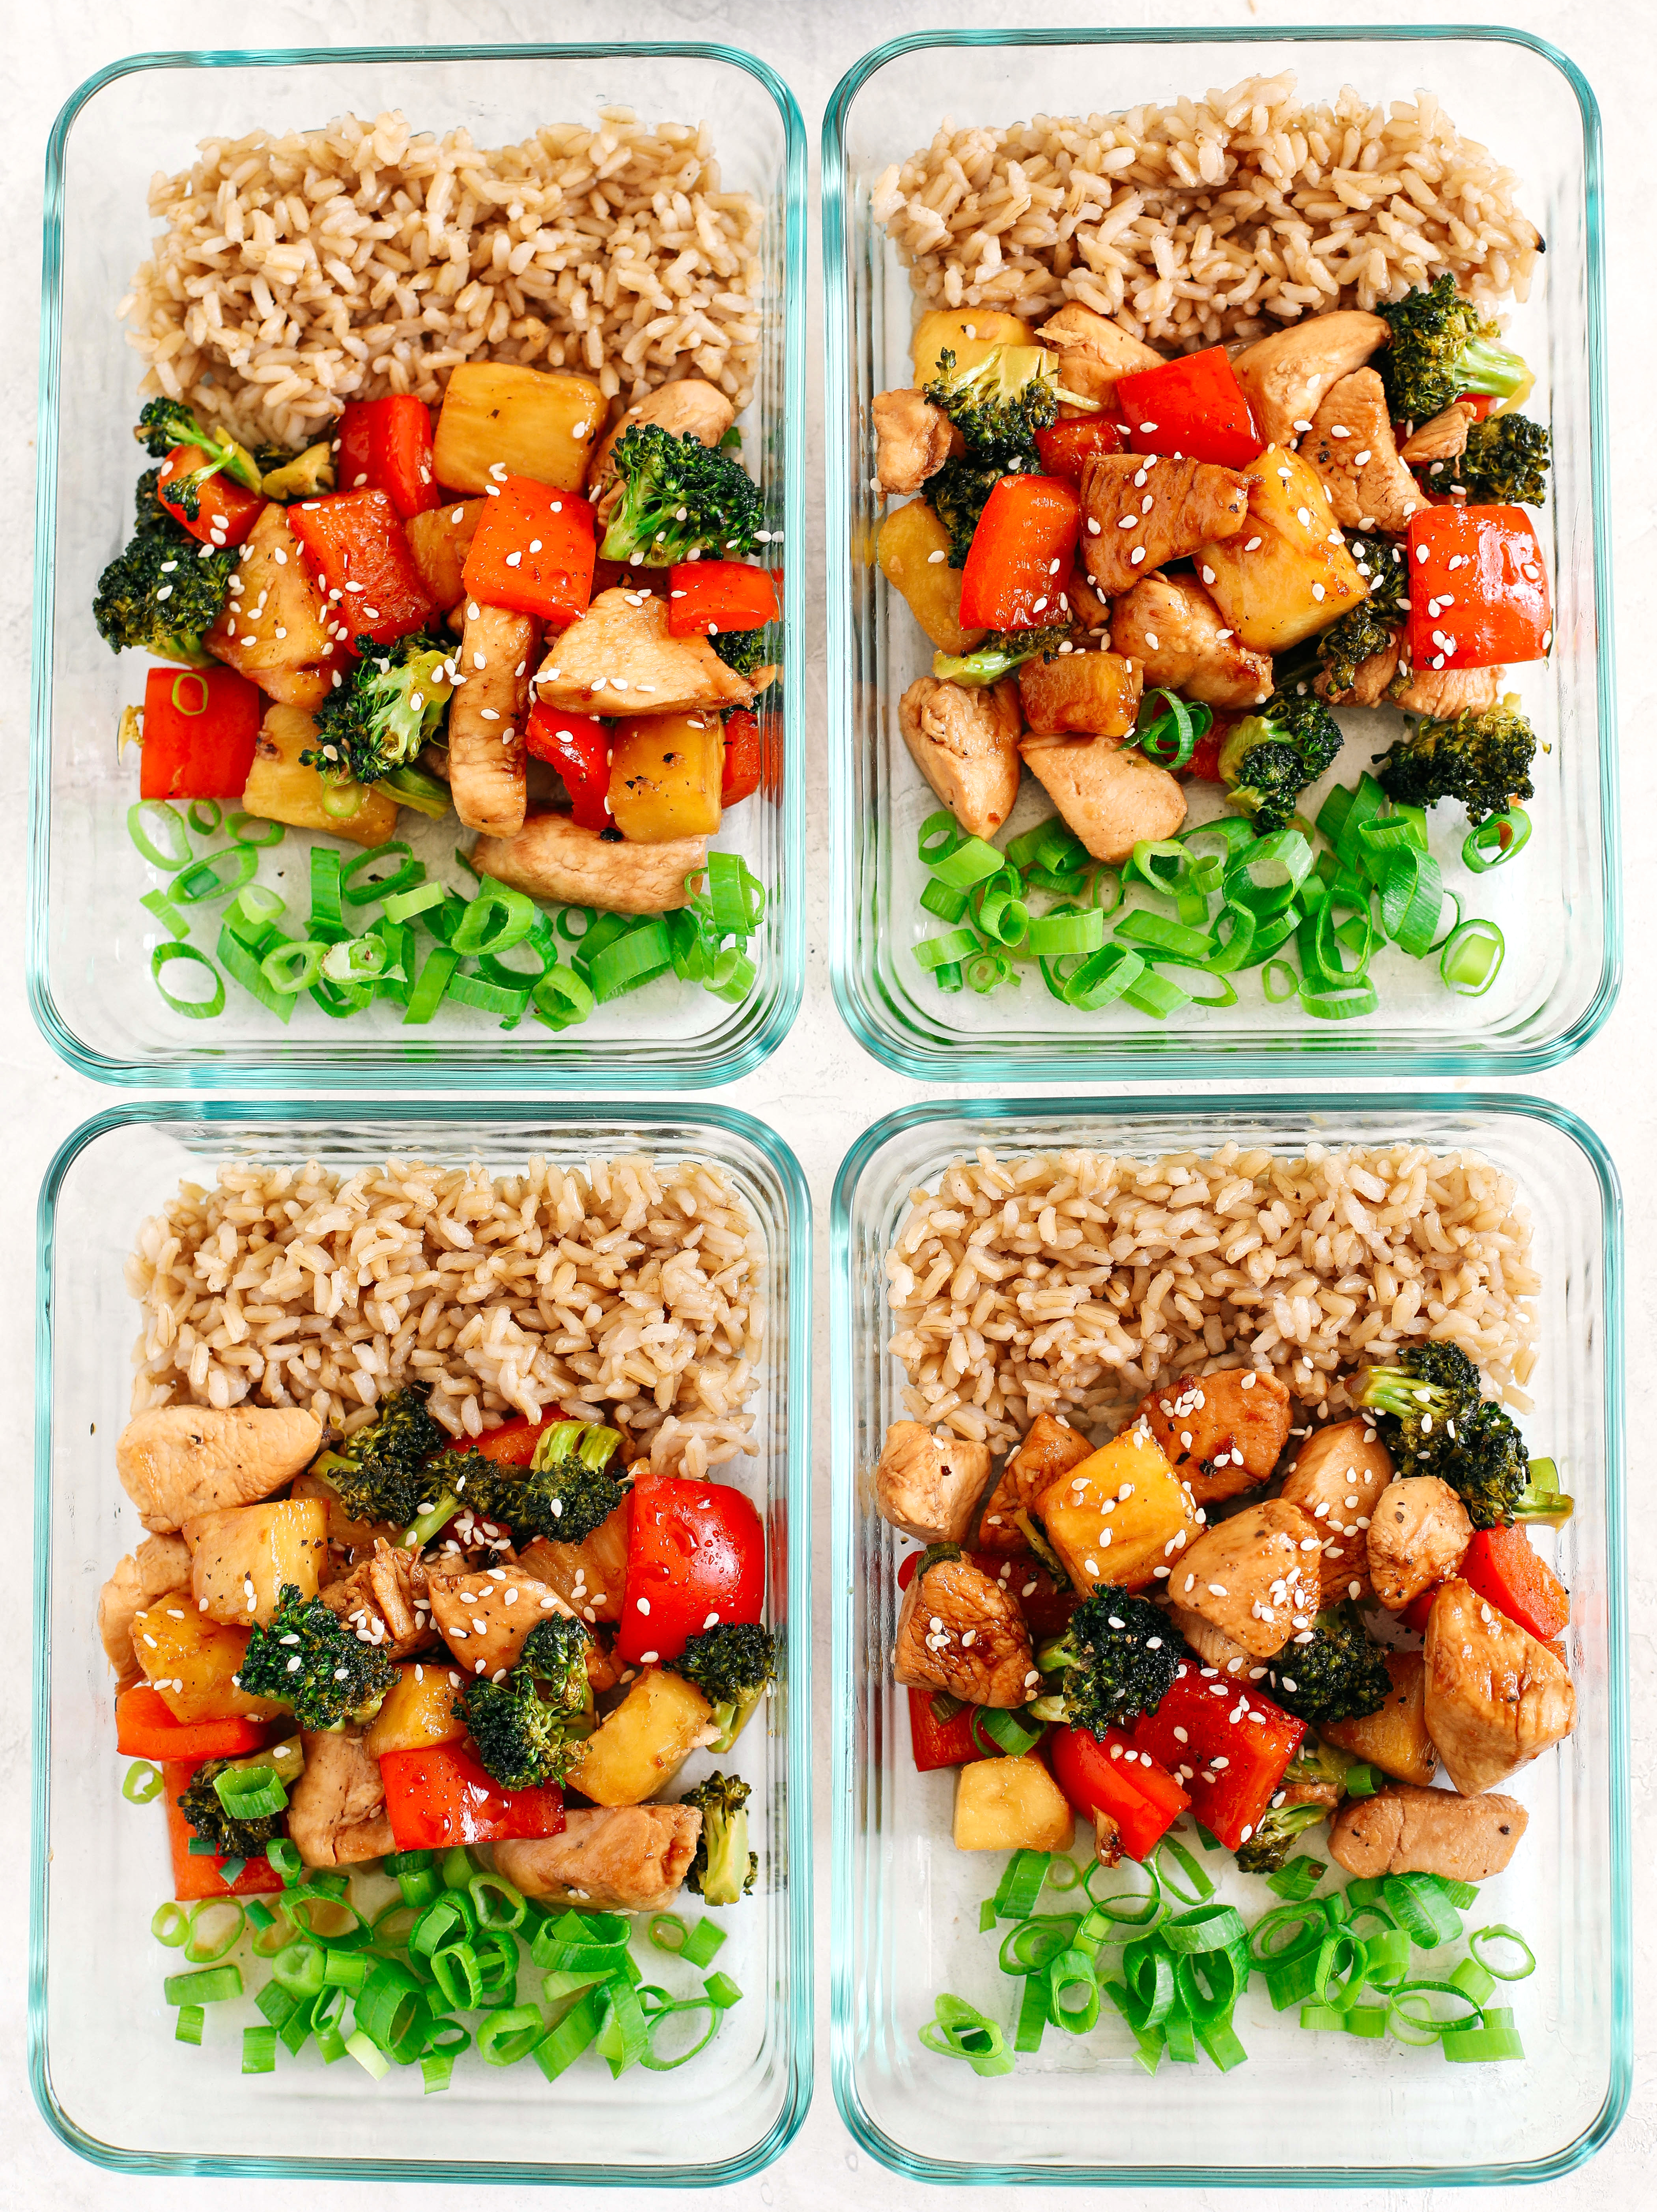 This EASY 20 minute One Pan Pineapple Teriyaki Chicken is the perfect weeknight meal that is healthy, loaded with flavor and perfect for your weekly meal prep!